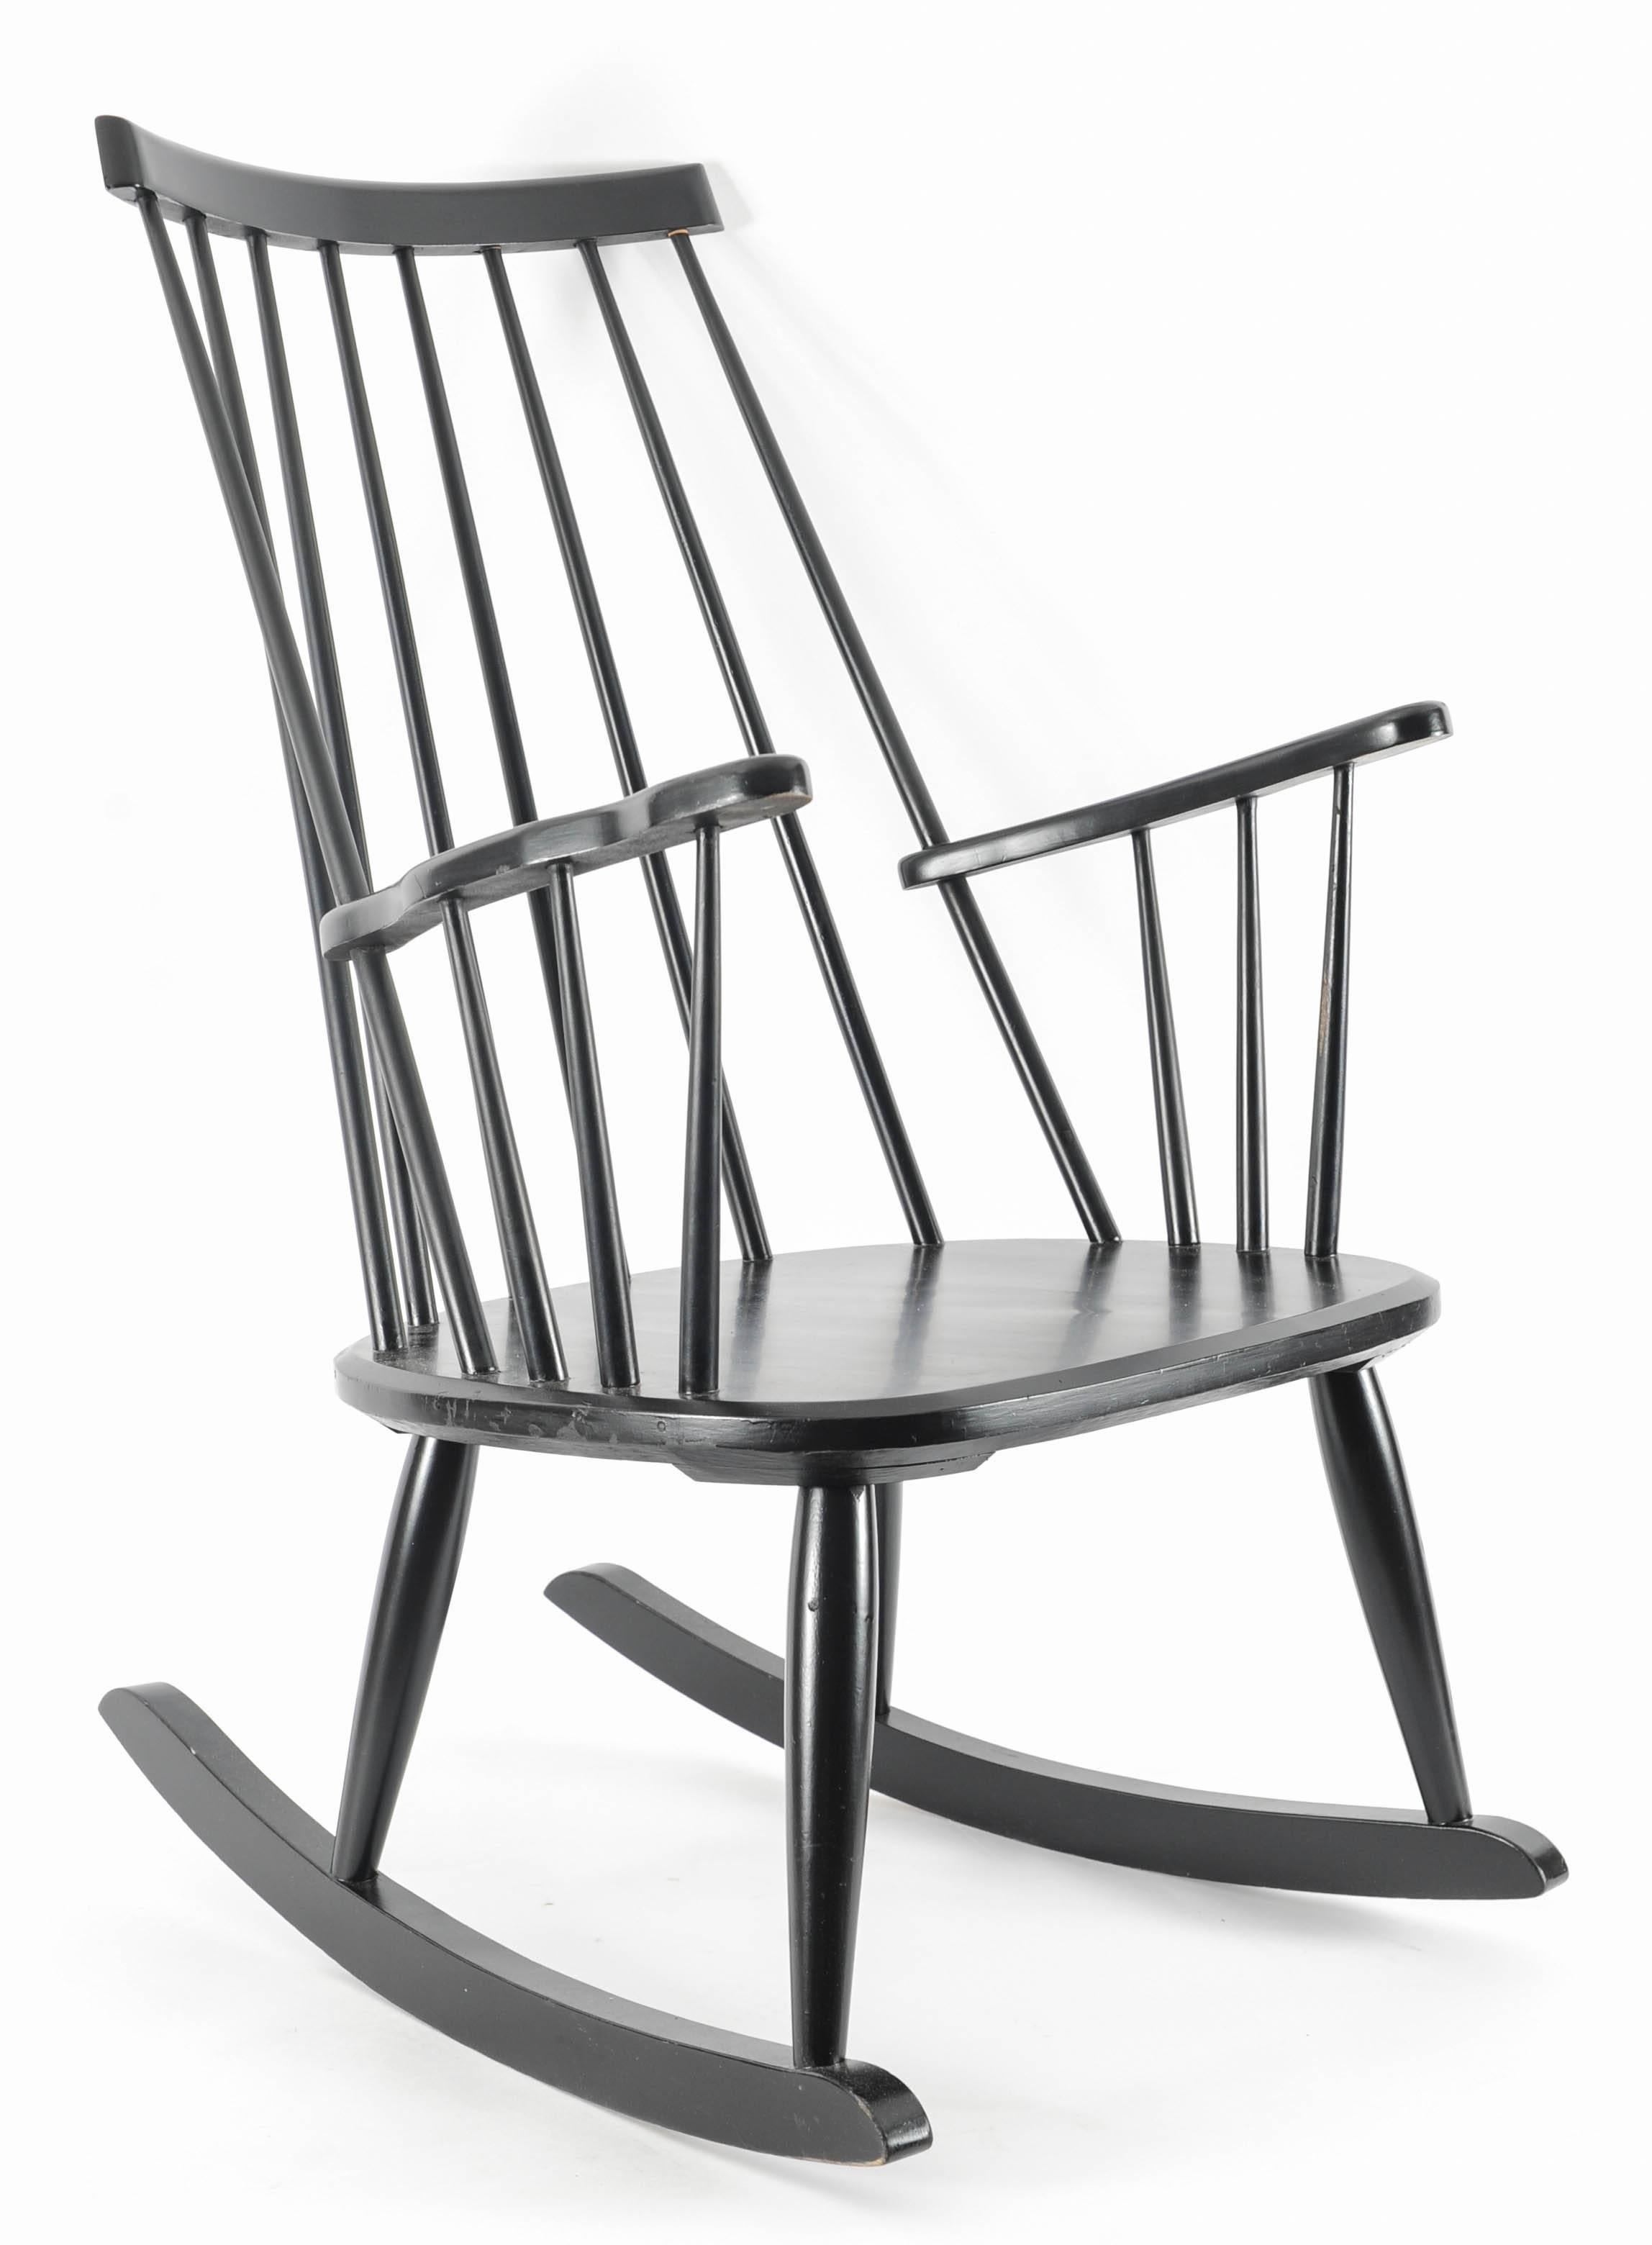 This rocking chair was designed by Lena Larsson and made by Nesto Sweden for Pastoe.